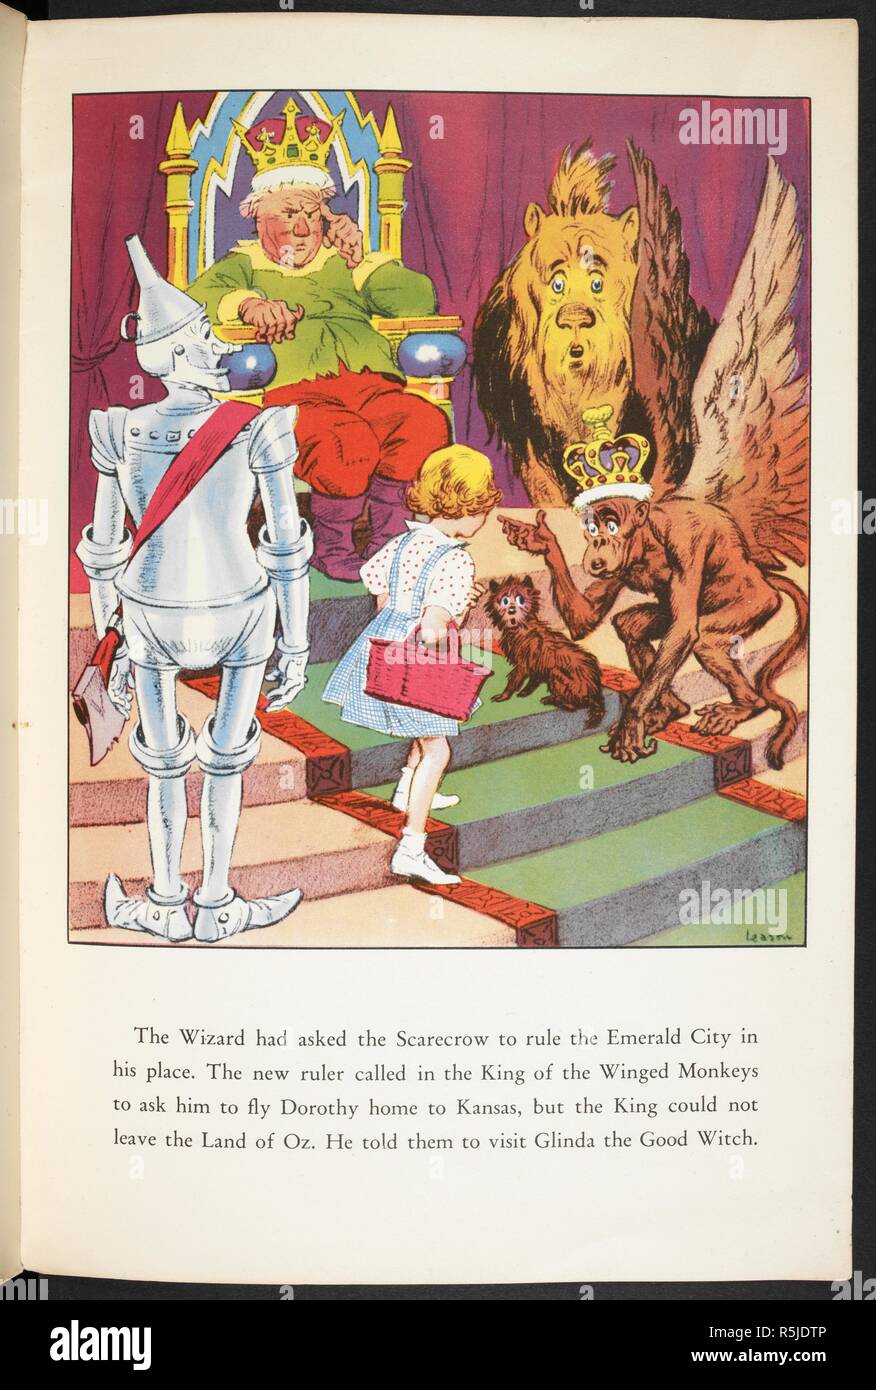 Dorothy meeting the ruler of the Emerald city, and the king of the winged monkeys. The Wizard of Oz picture book. London : Hutchinson, [1940]. Source: LB.31.c.9373 page 8. Author: BAUM, LYMAN FRANK. Leason, Percy Alexander. Stock Photo